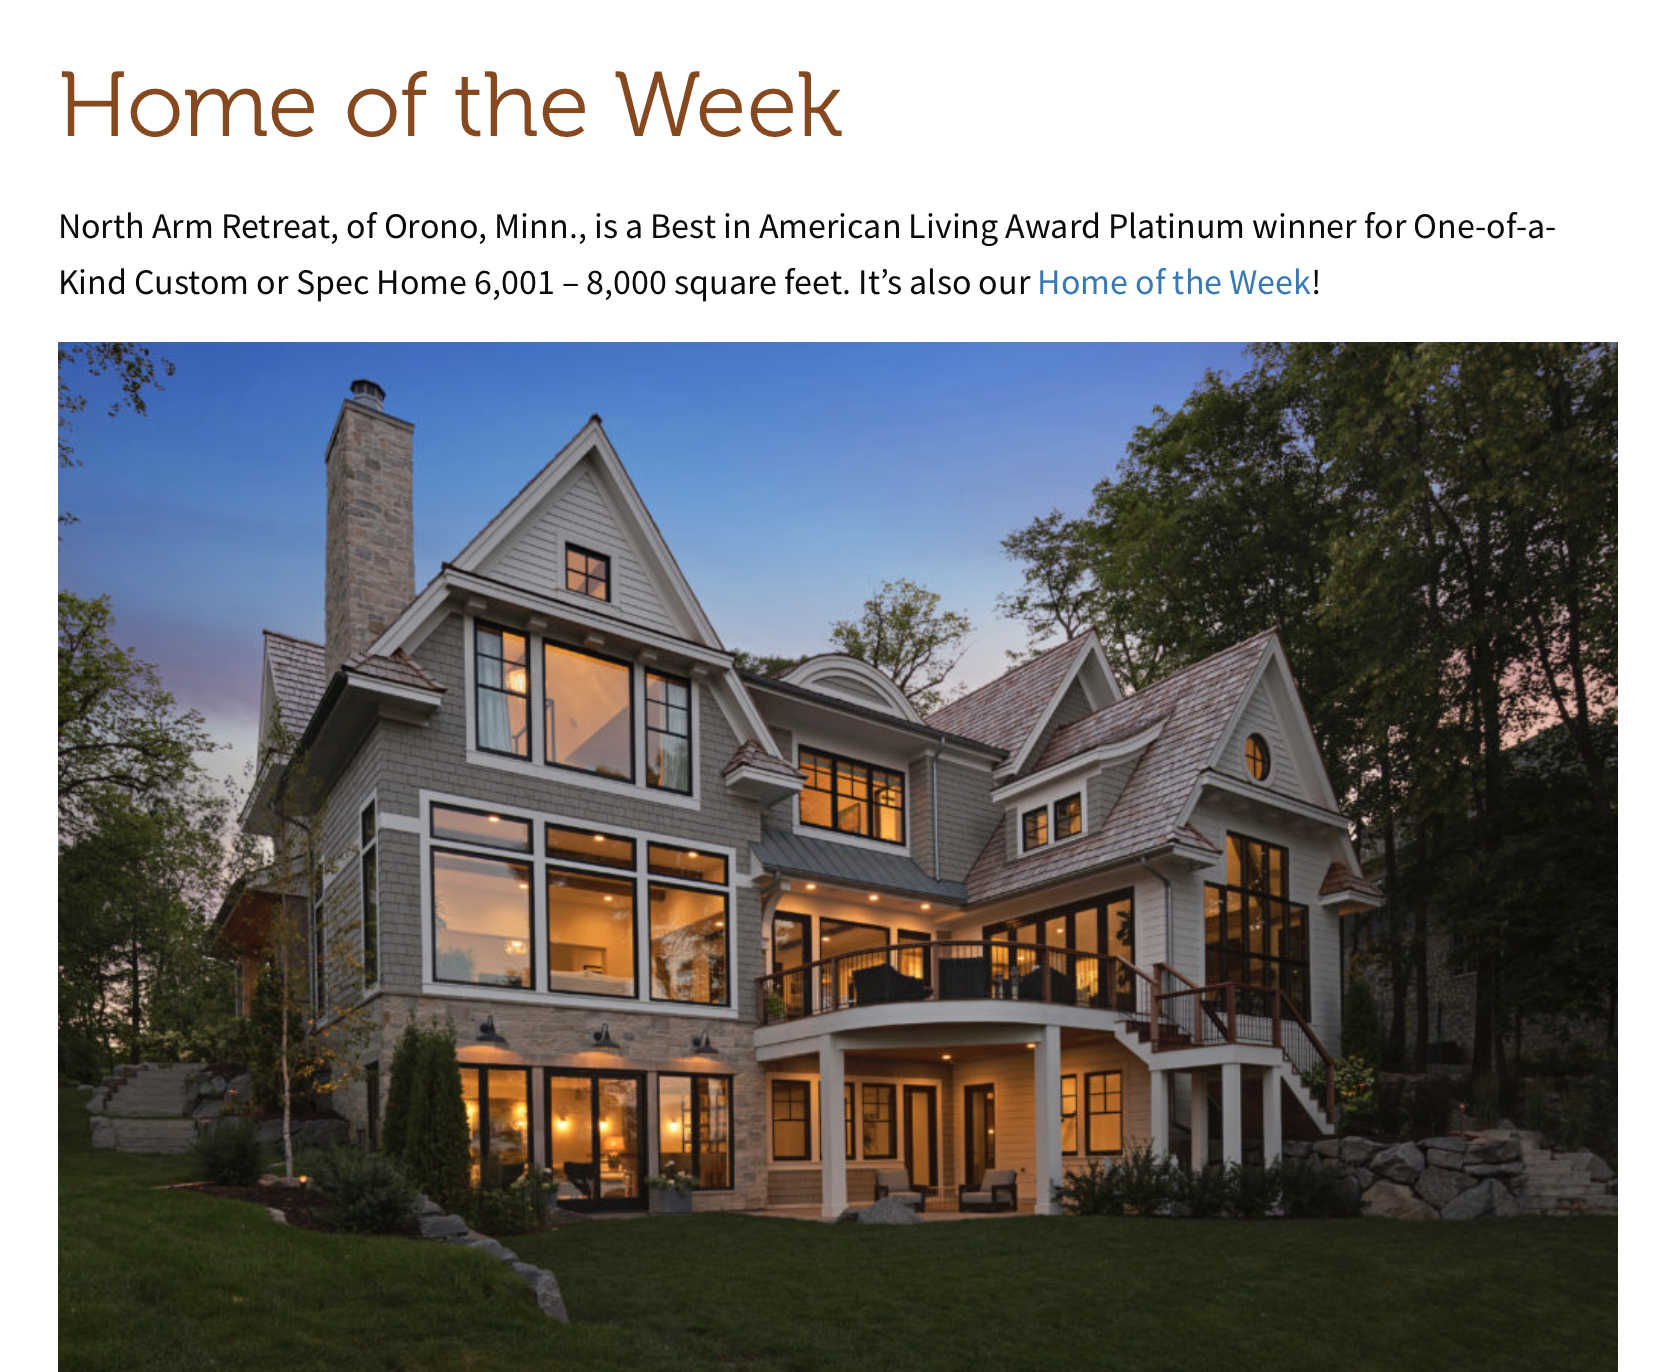 Home of the Week 2017